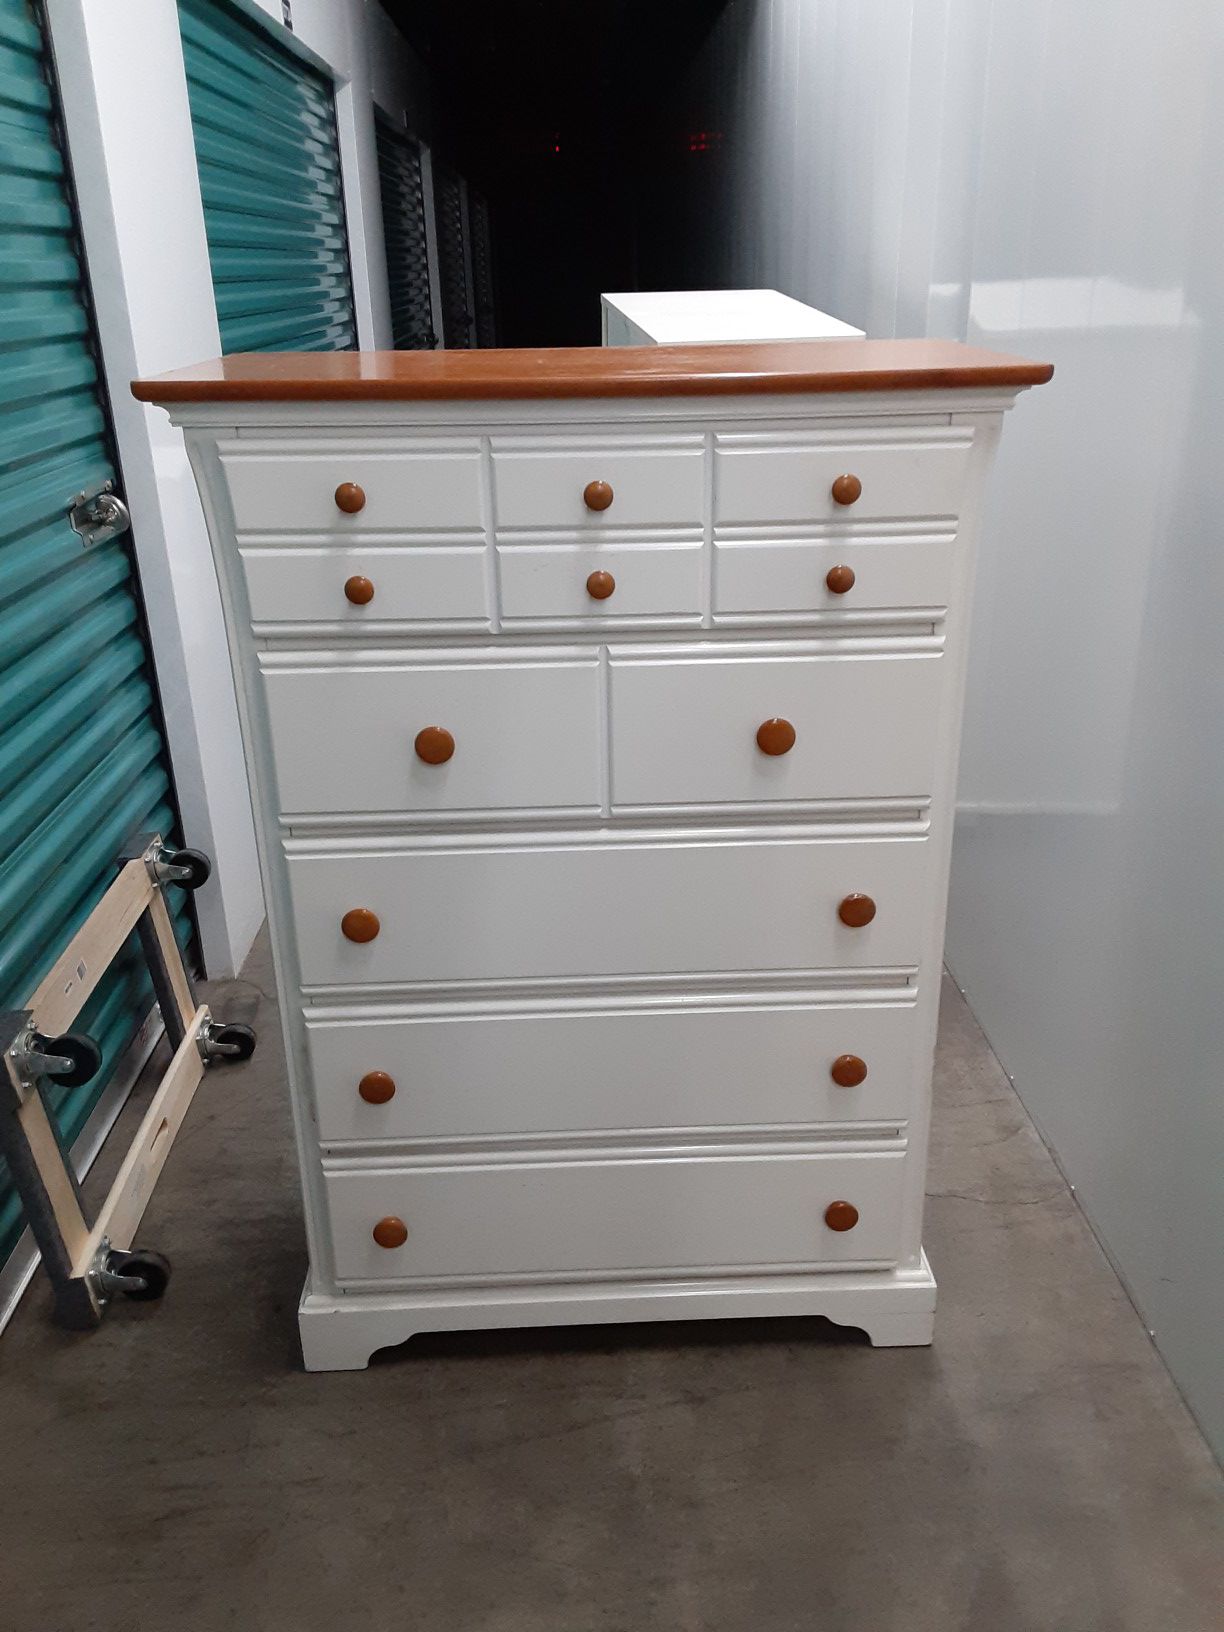 Dresser 6-7/10 condition. Must go first come first serve.